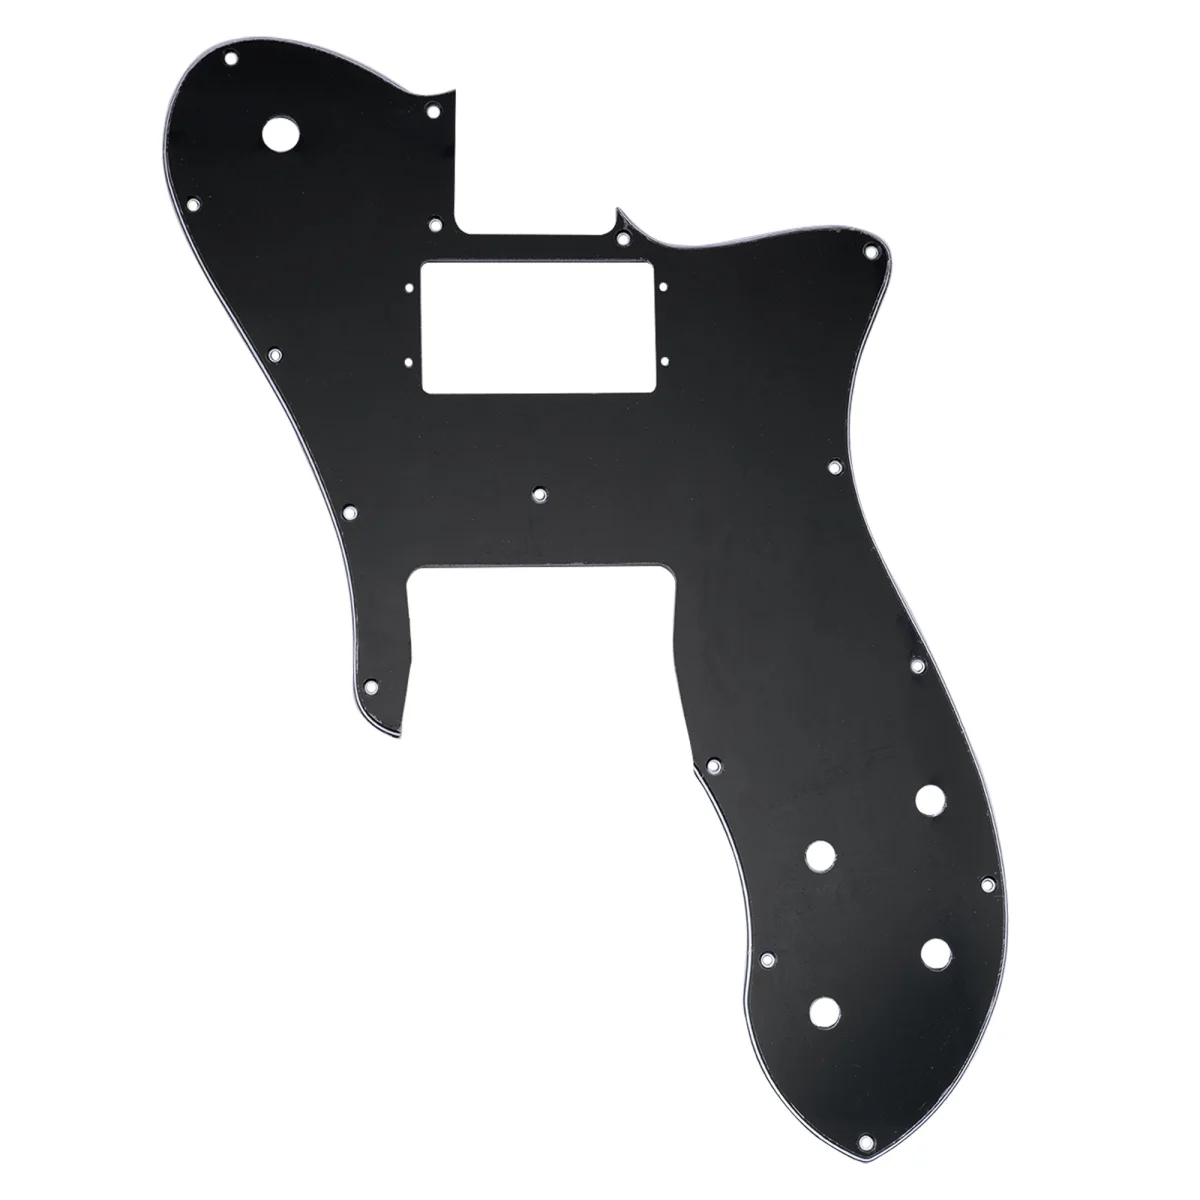 

Musiclily Pro 16 Holes Wide Range Humbucker Pickguard For USA/Mexico Fender 72 Tele Custom Style Electric Guitar, 3ply Black